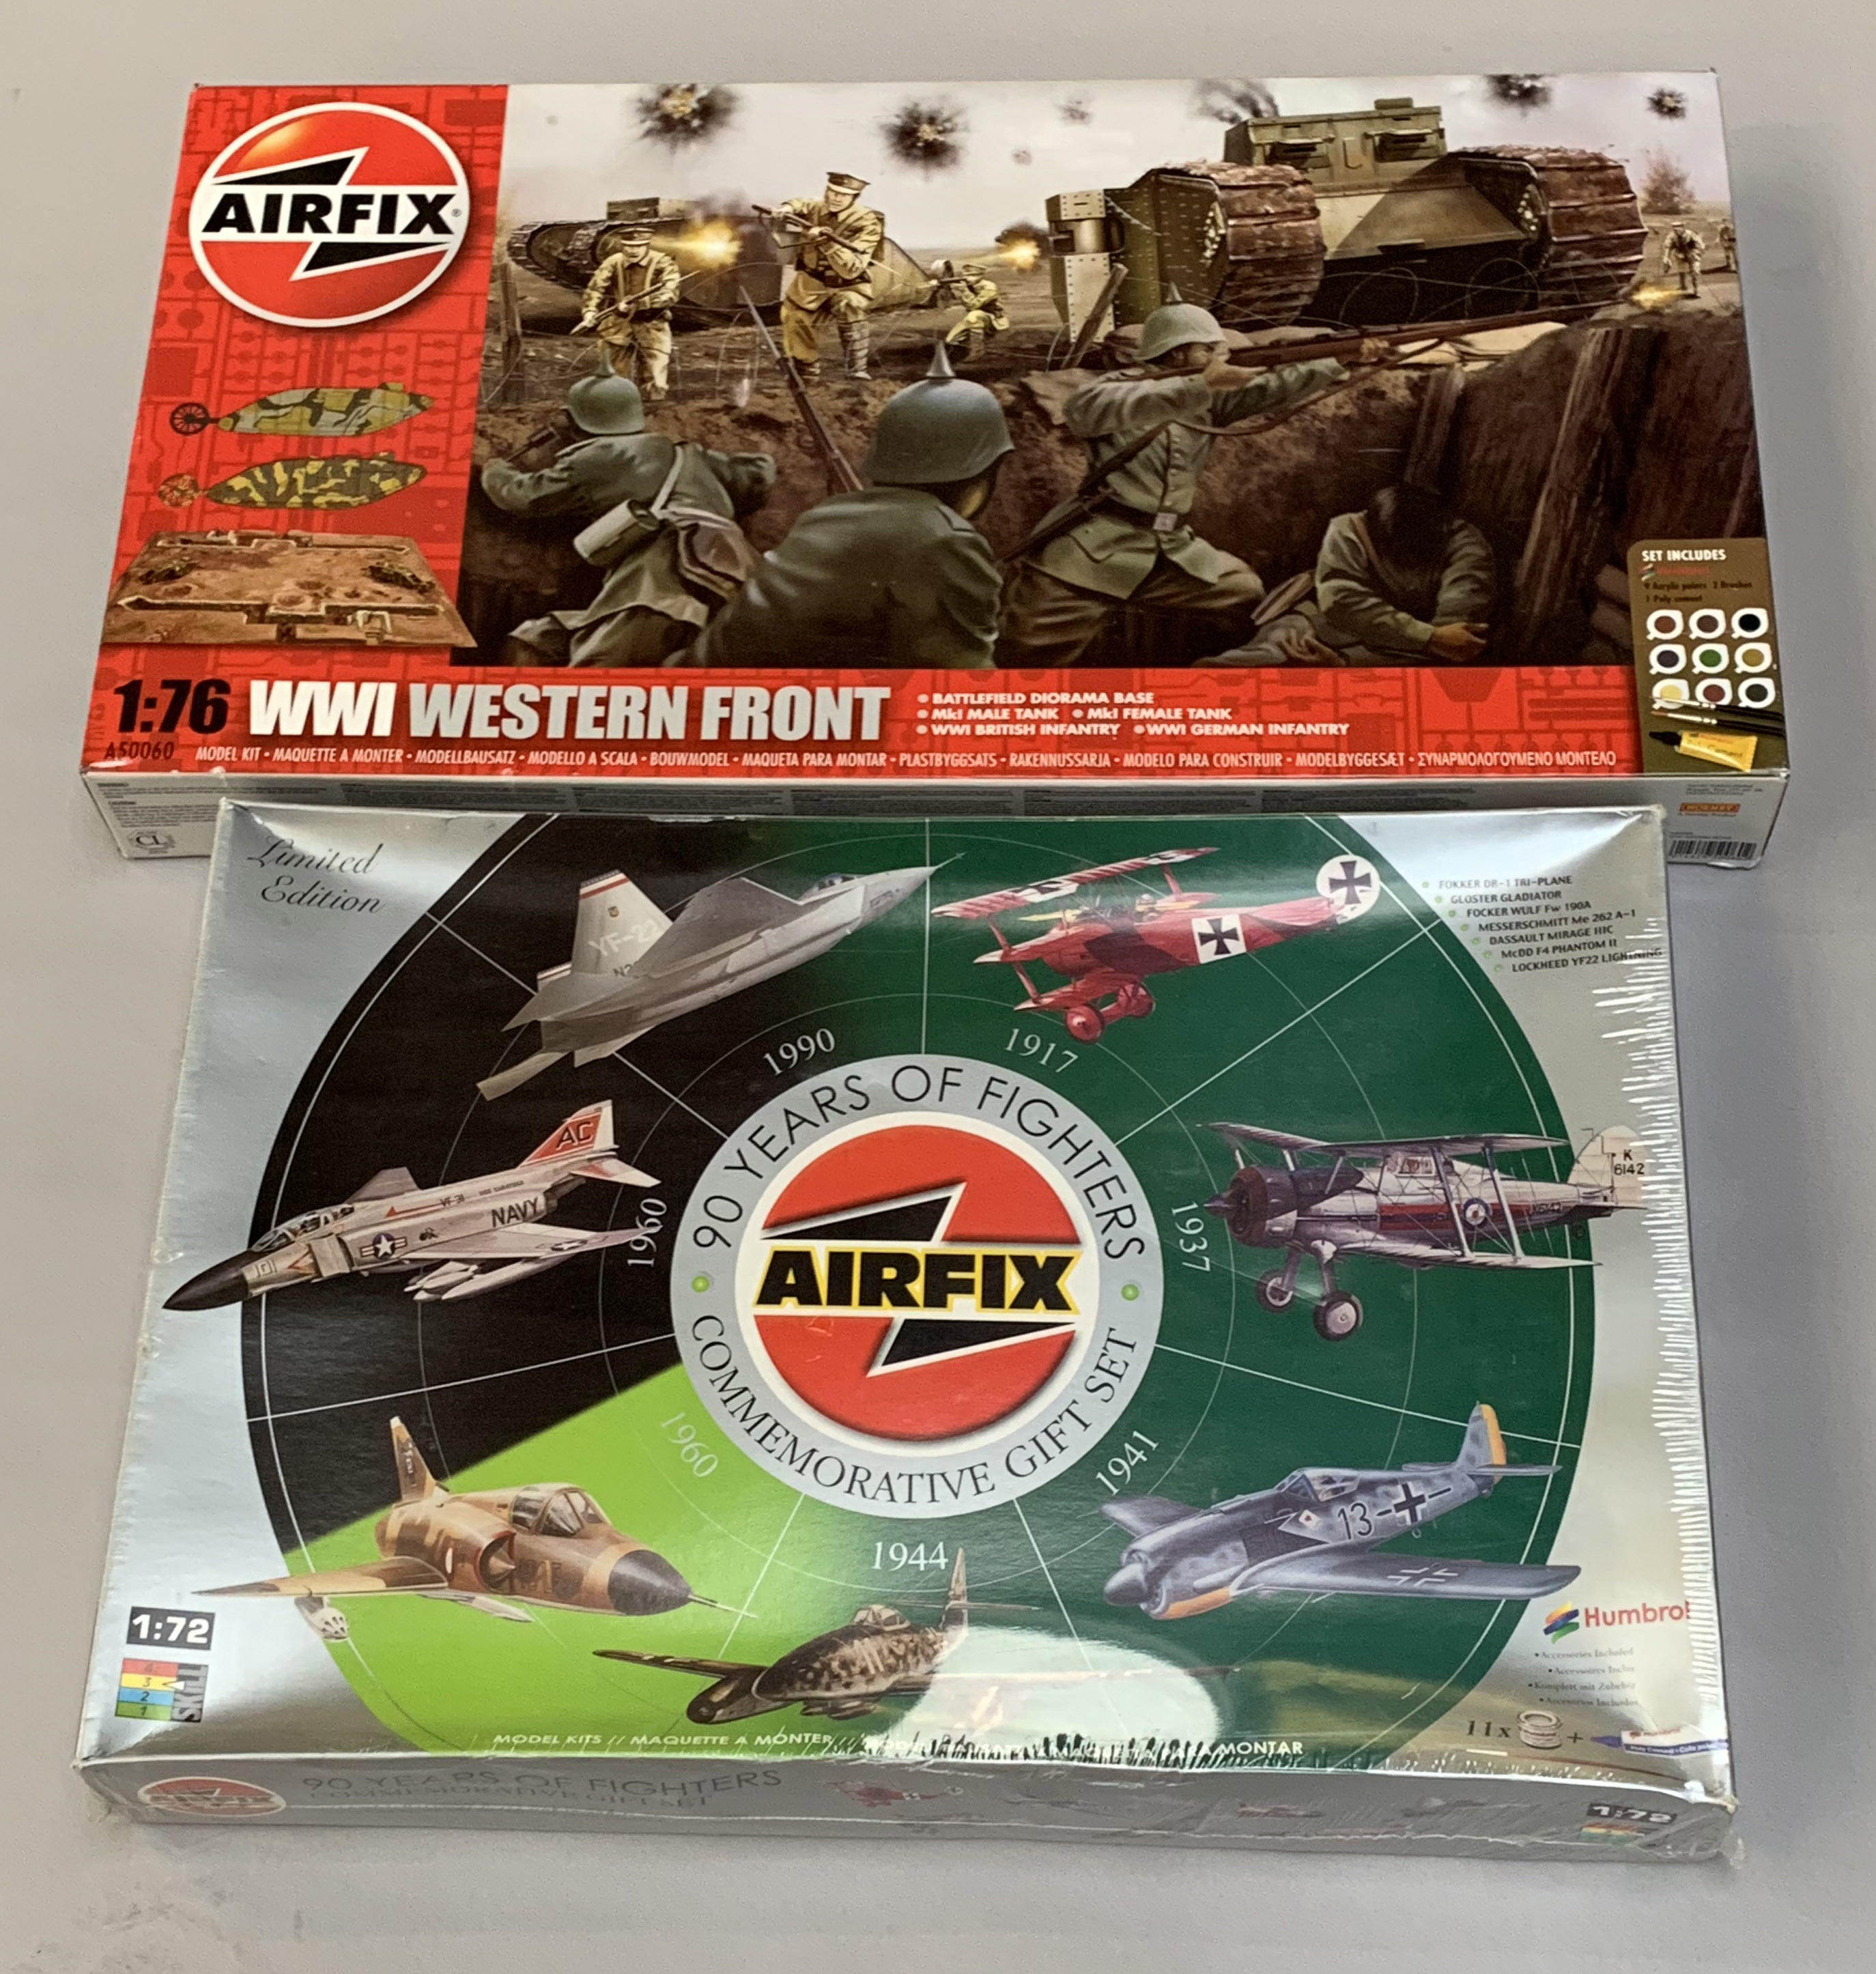 Two Airfix plastic model kits: A50060 WWI Western Front 1:76 scale;